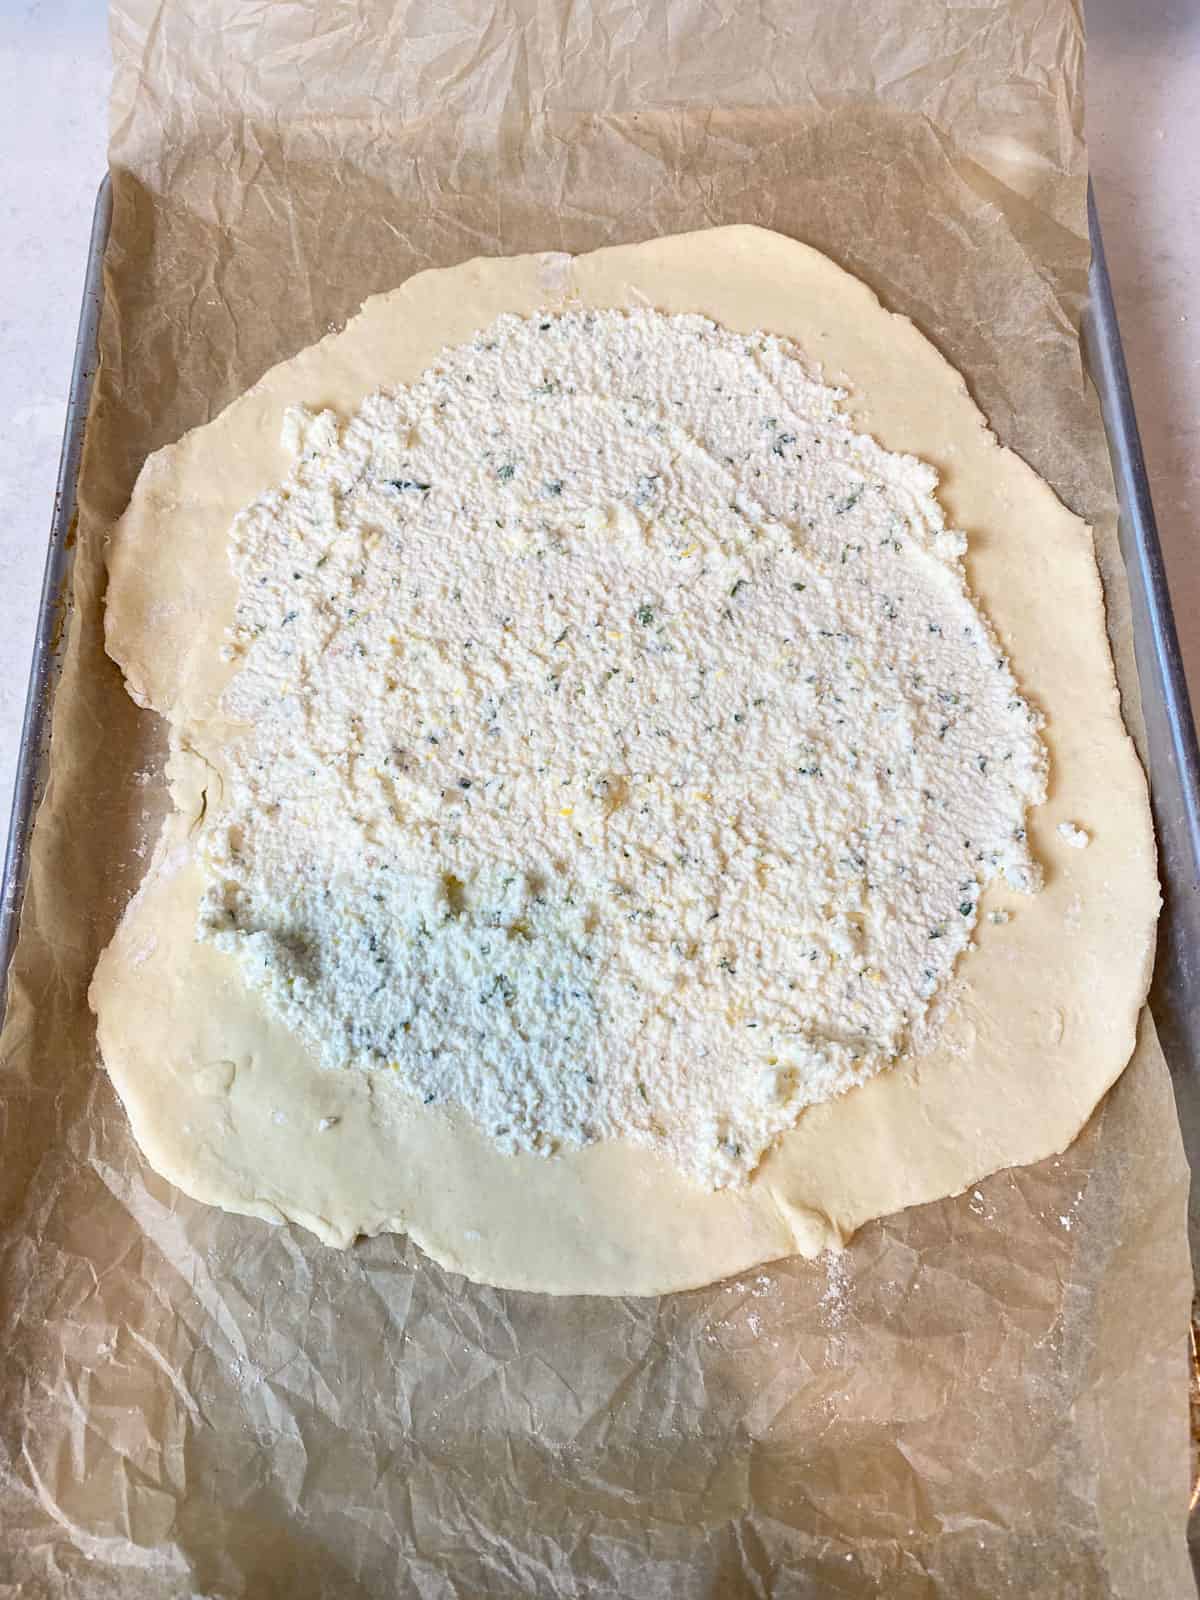 Spread the ricotta mixture into a thin layer onto the galette dough.